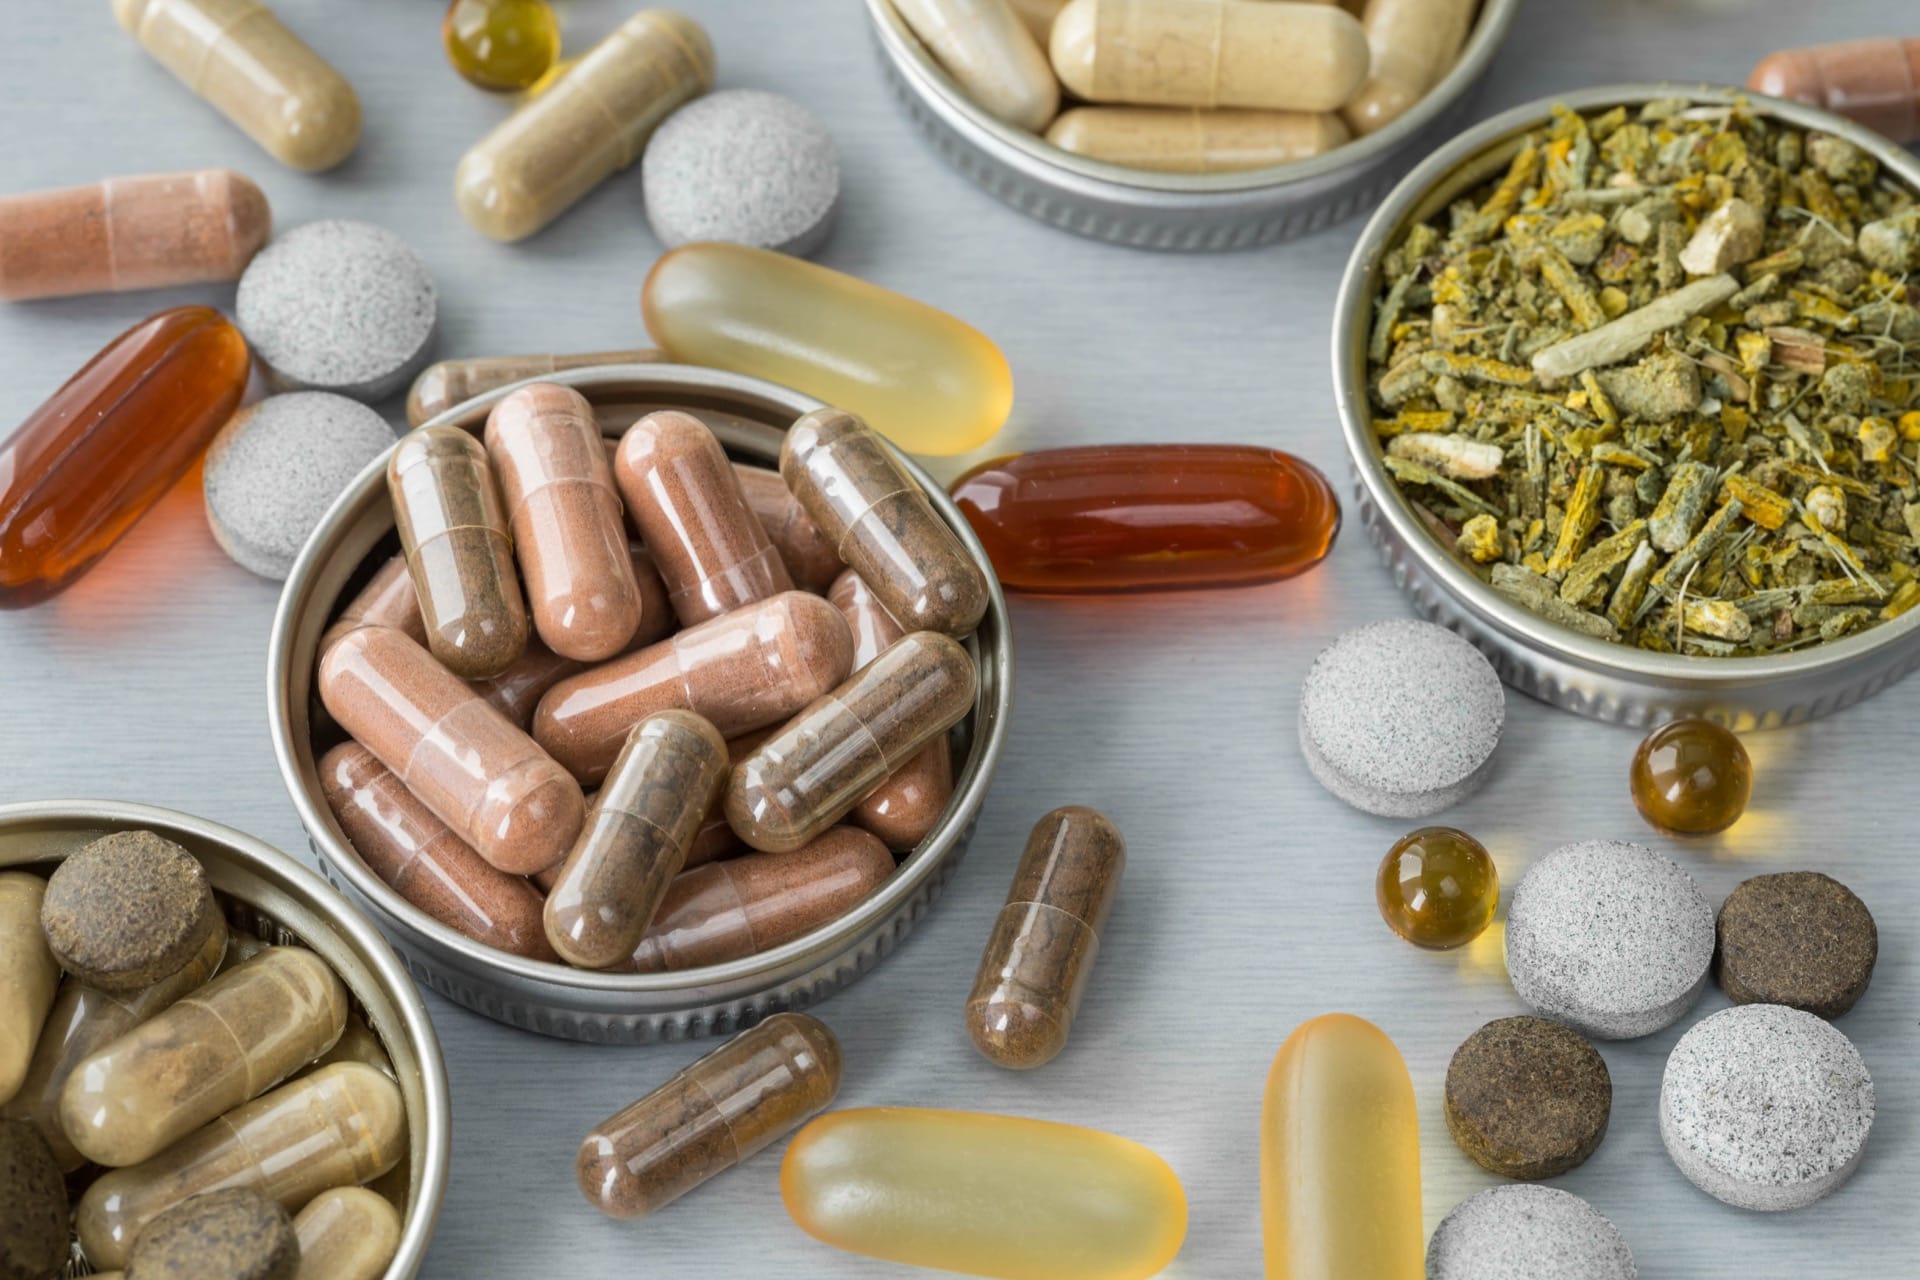 Vitamin Boost: Why It's Important to Consume Vitamins and Supplements to Support Immunity